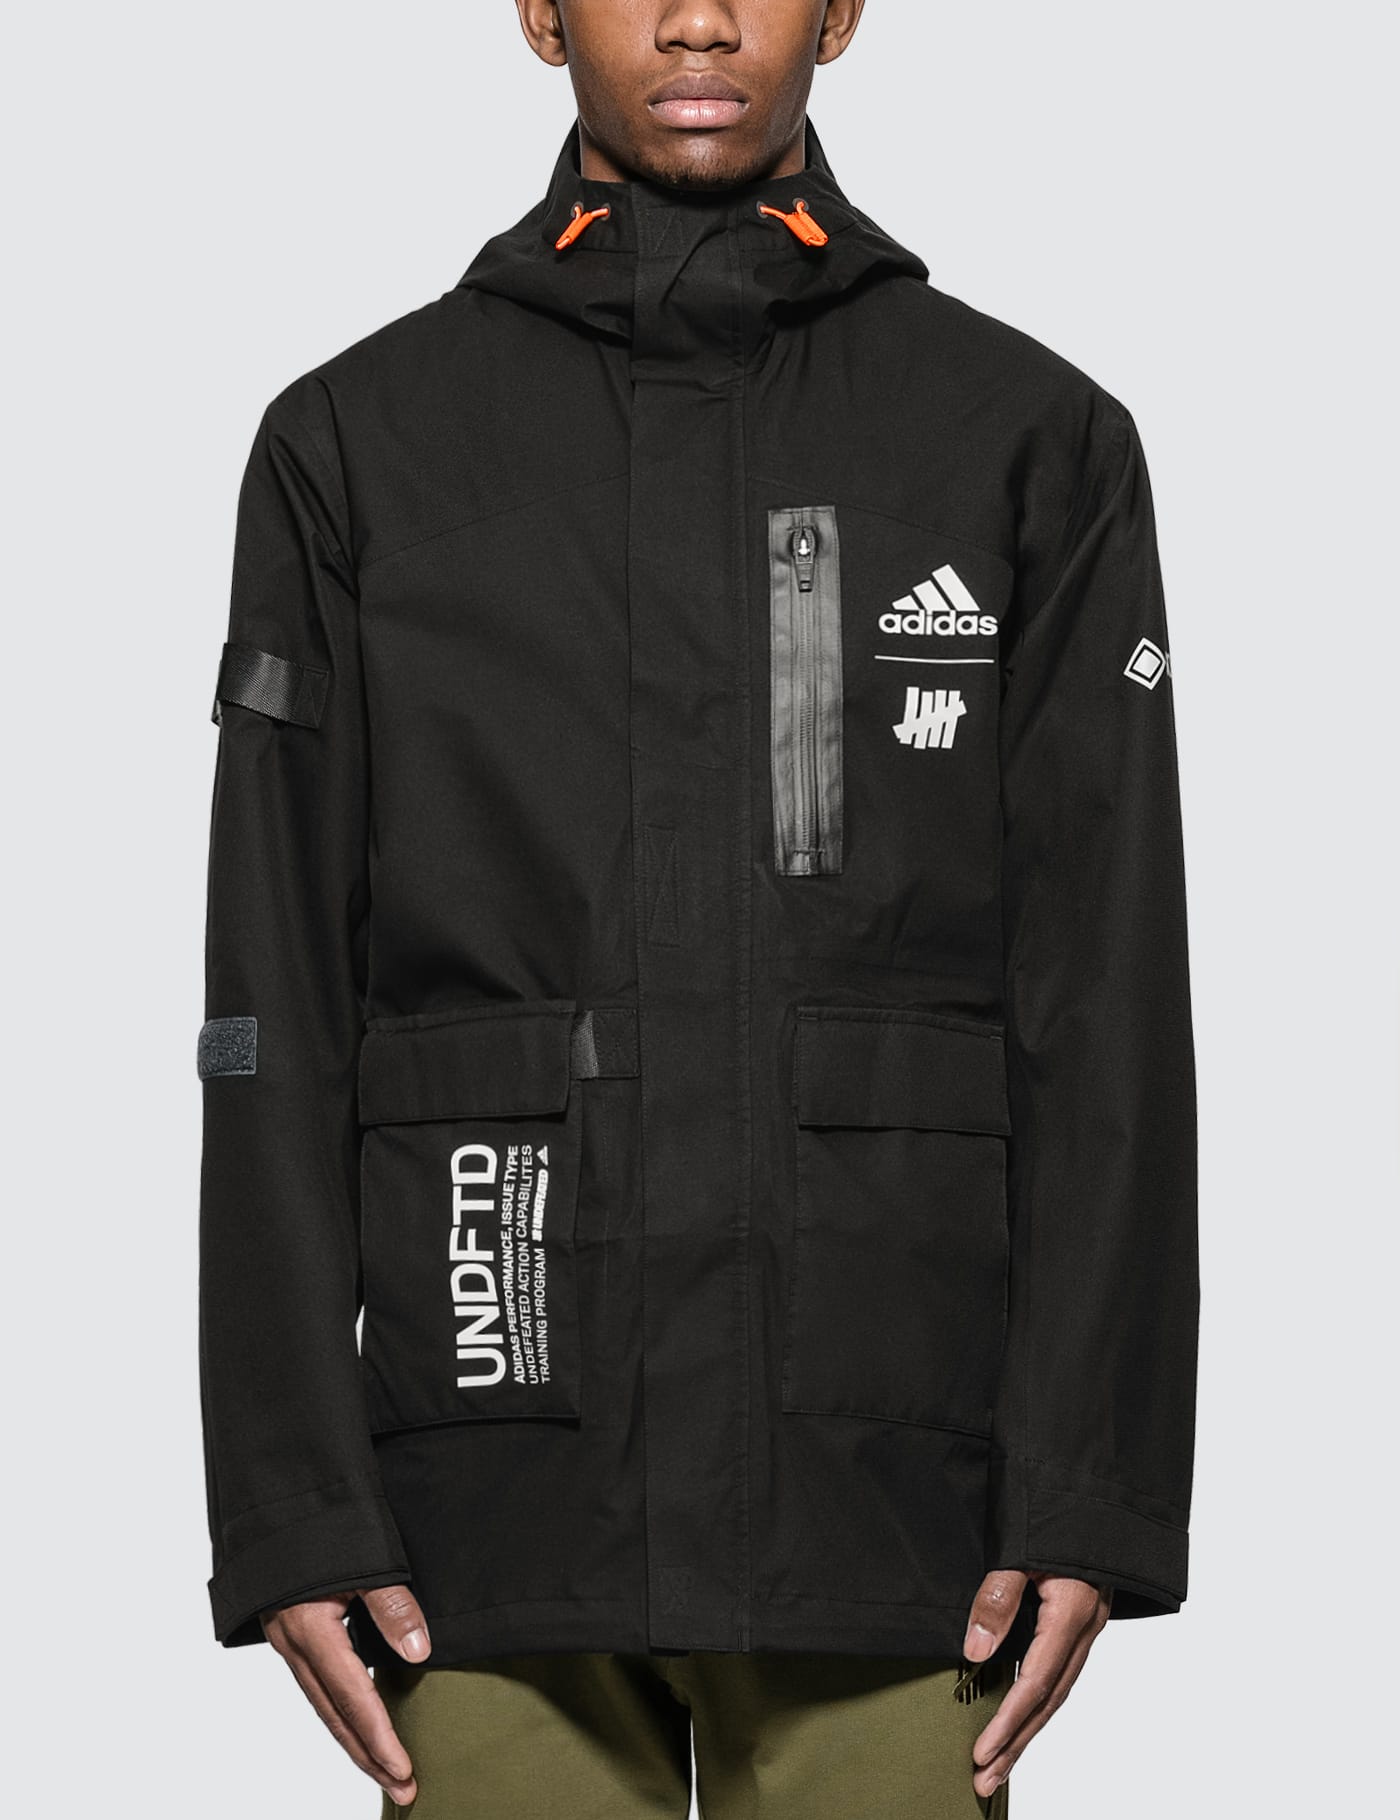 adidas undefeated gore tex